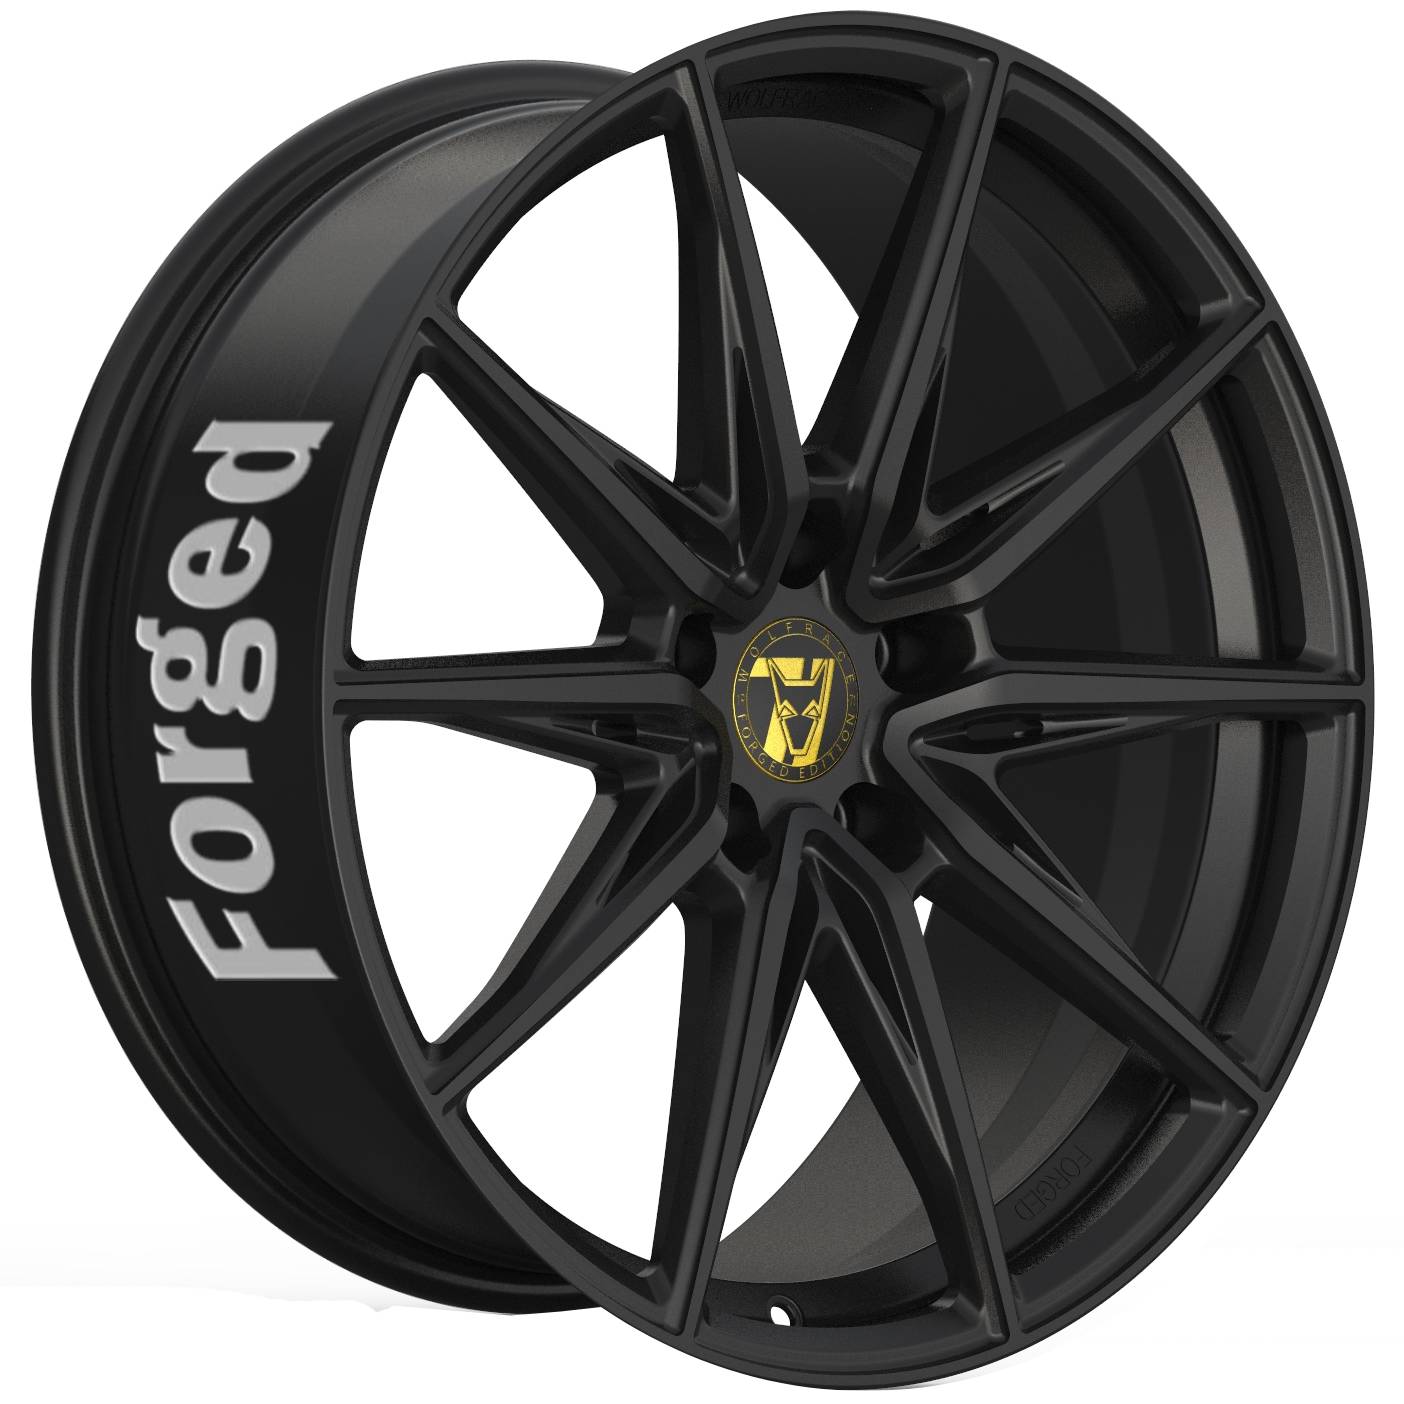 Jantes alu Demon Wheels 71 Forged Edition Urban Racer Forged [13x23] -5x114.3- ET 45